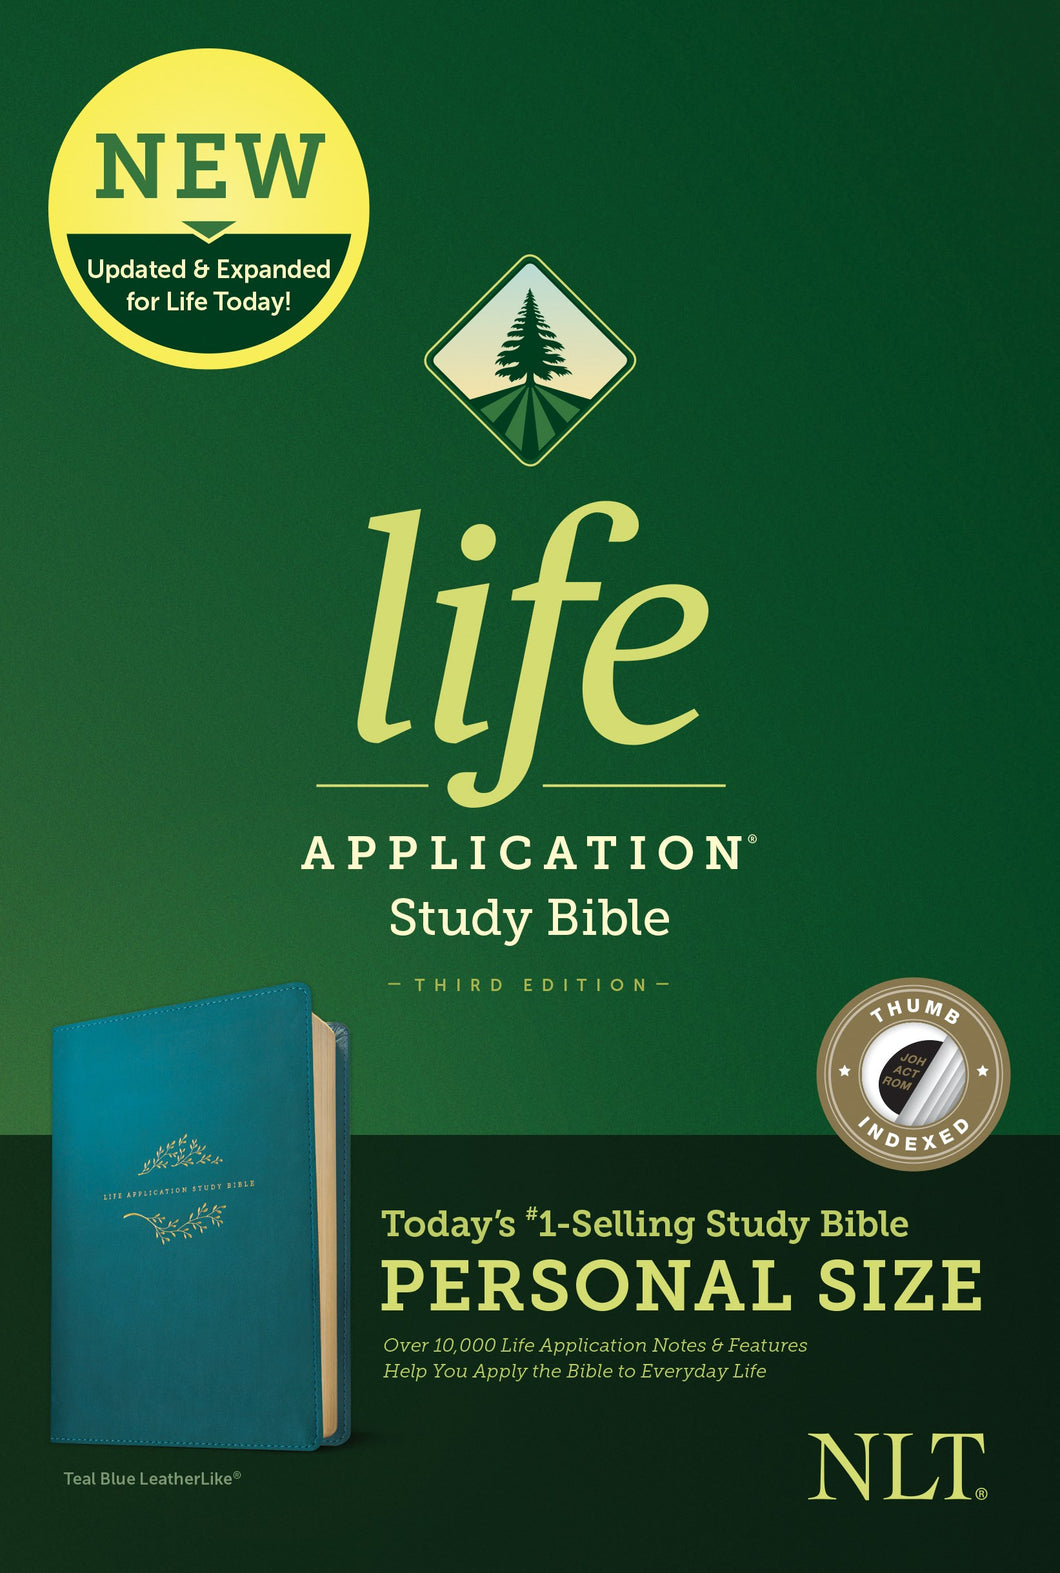 NLT Life Application Study Bible/Personal Size (Third Edition)-Teal Blue LeatherLike Indexed